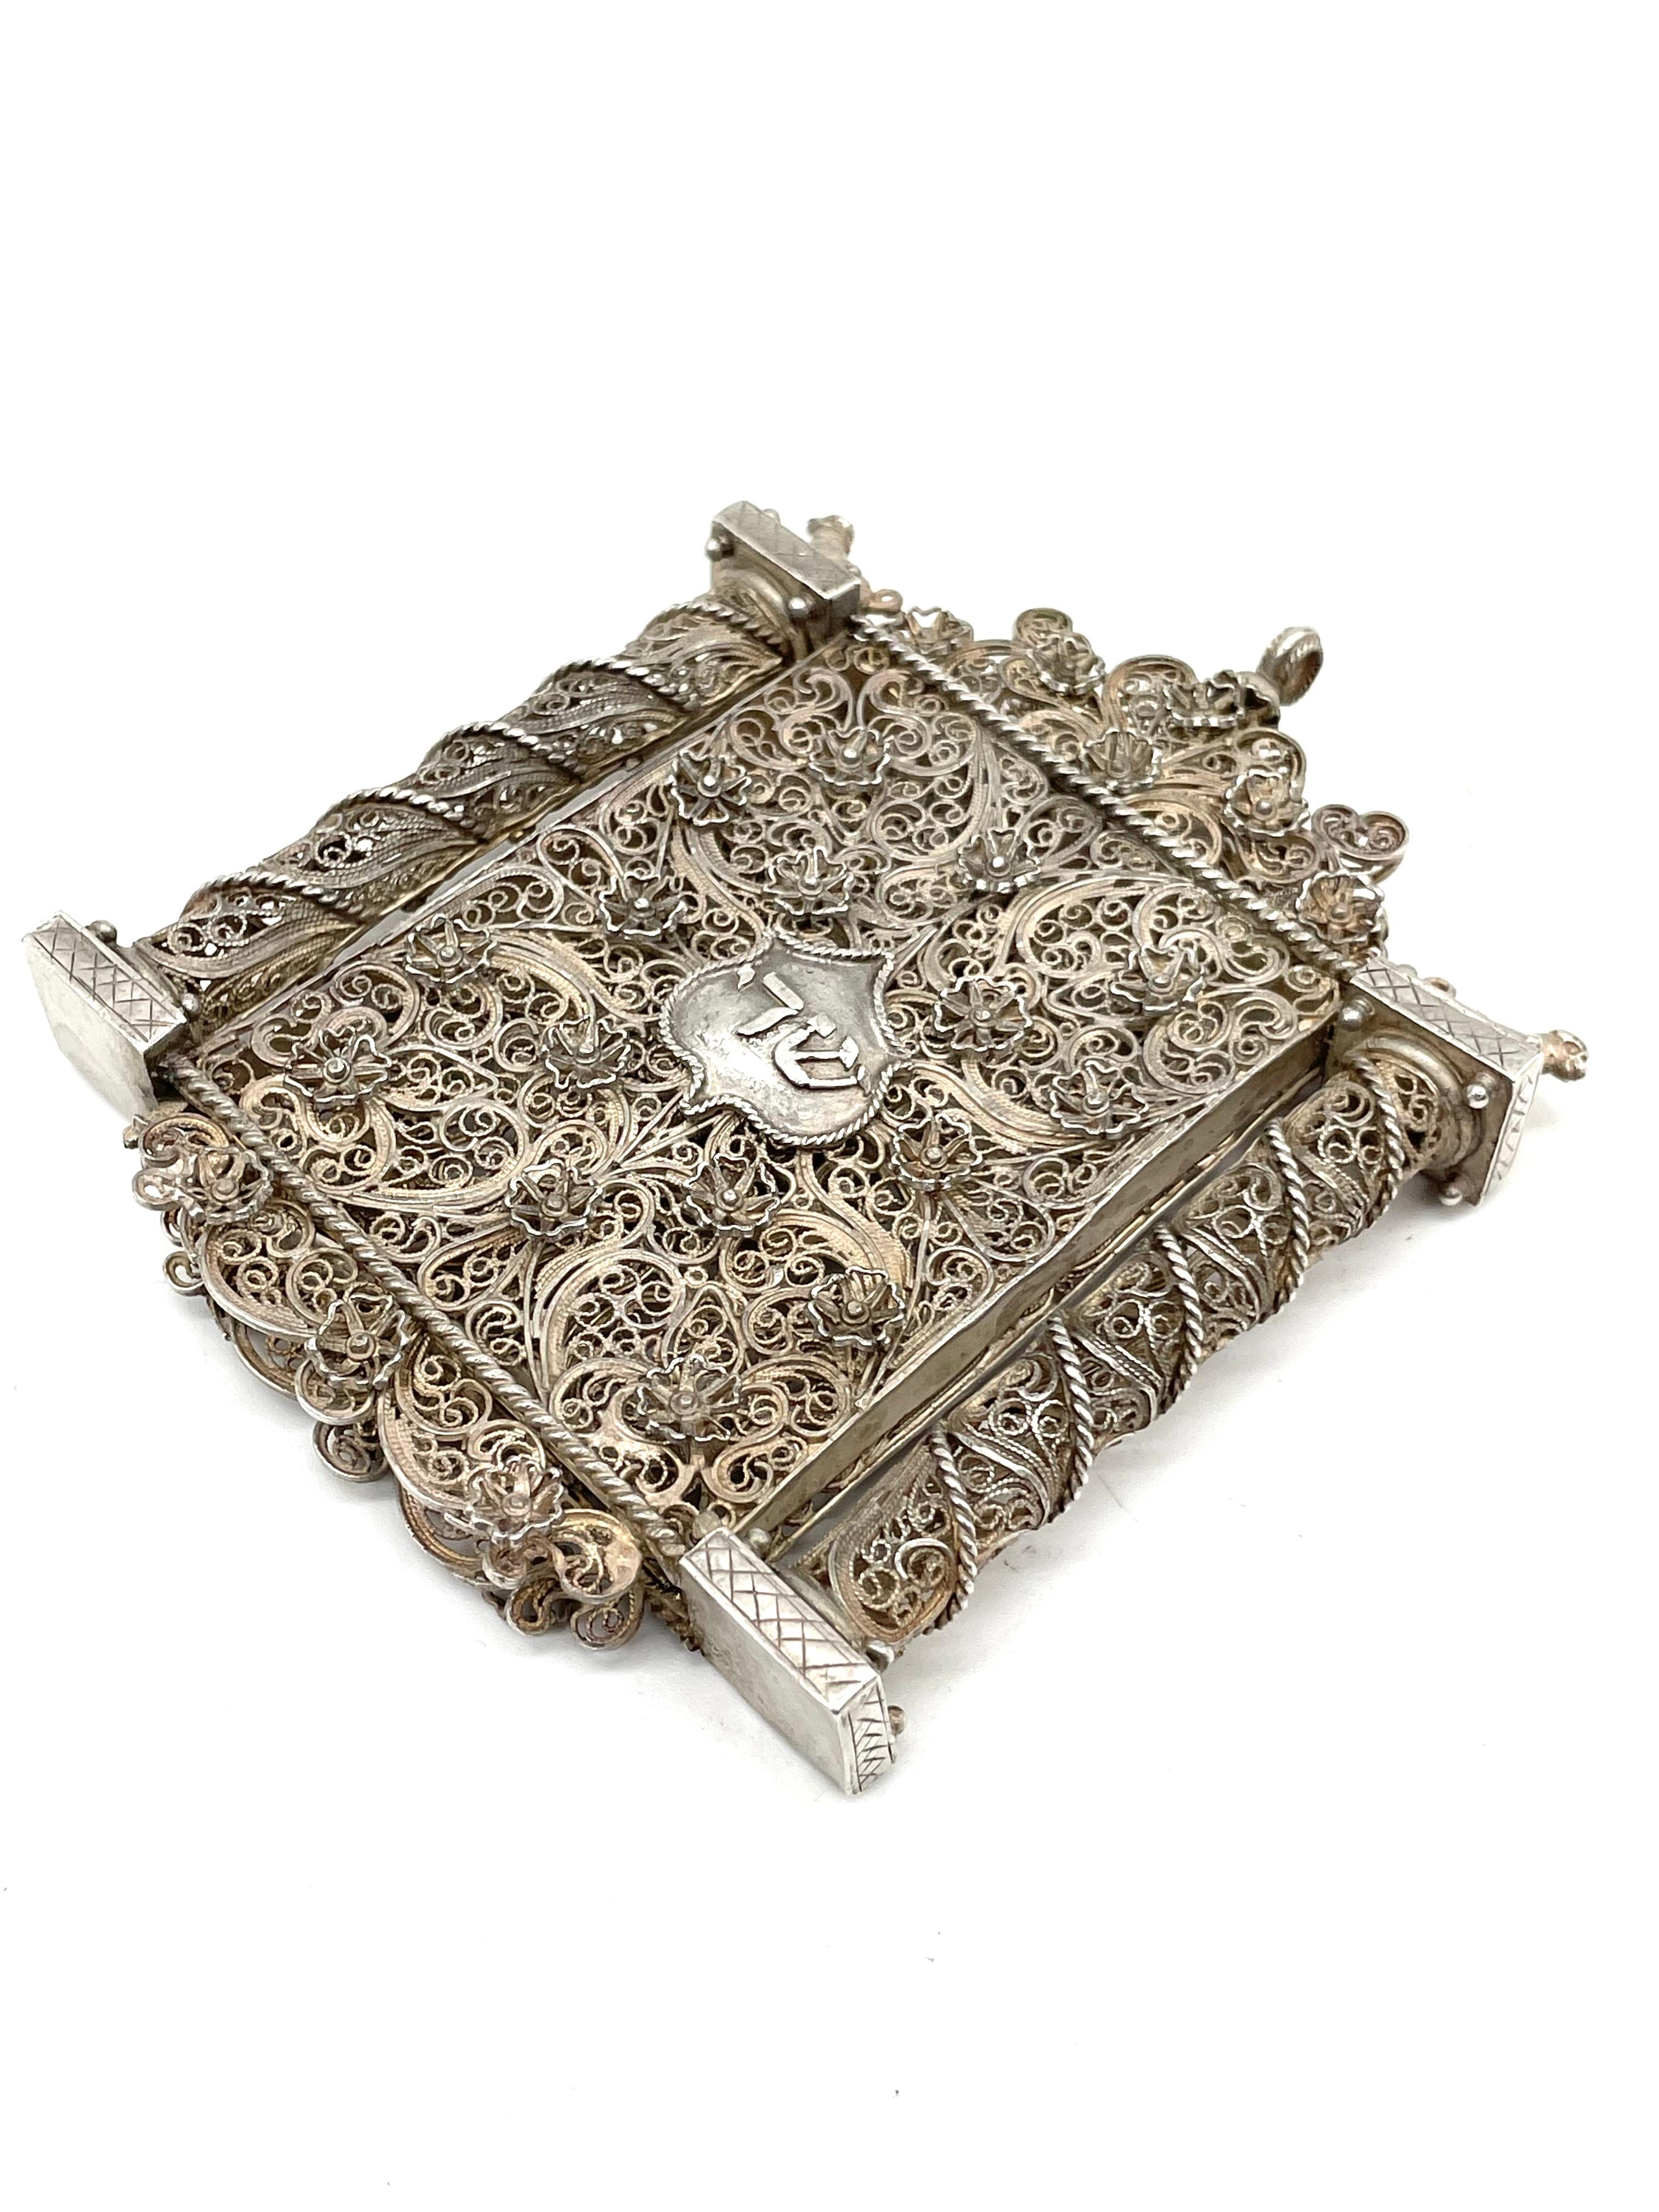 Hand-Crafted Late 18th Century Italian Silver Filigree Amulet